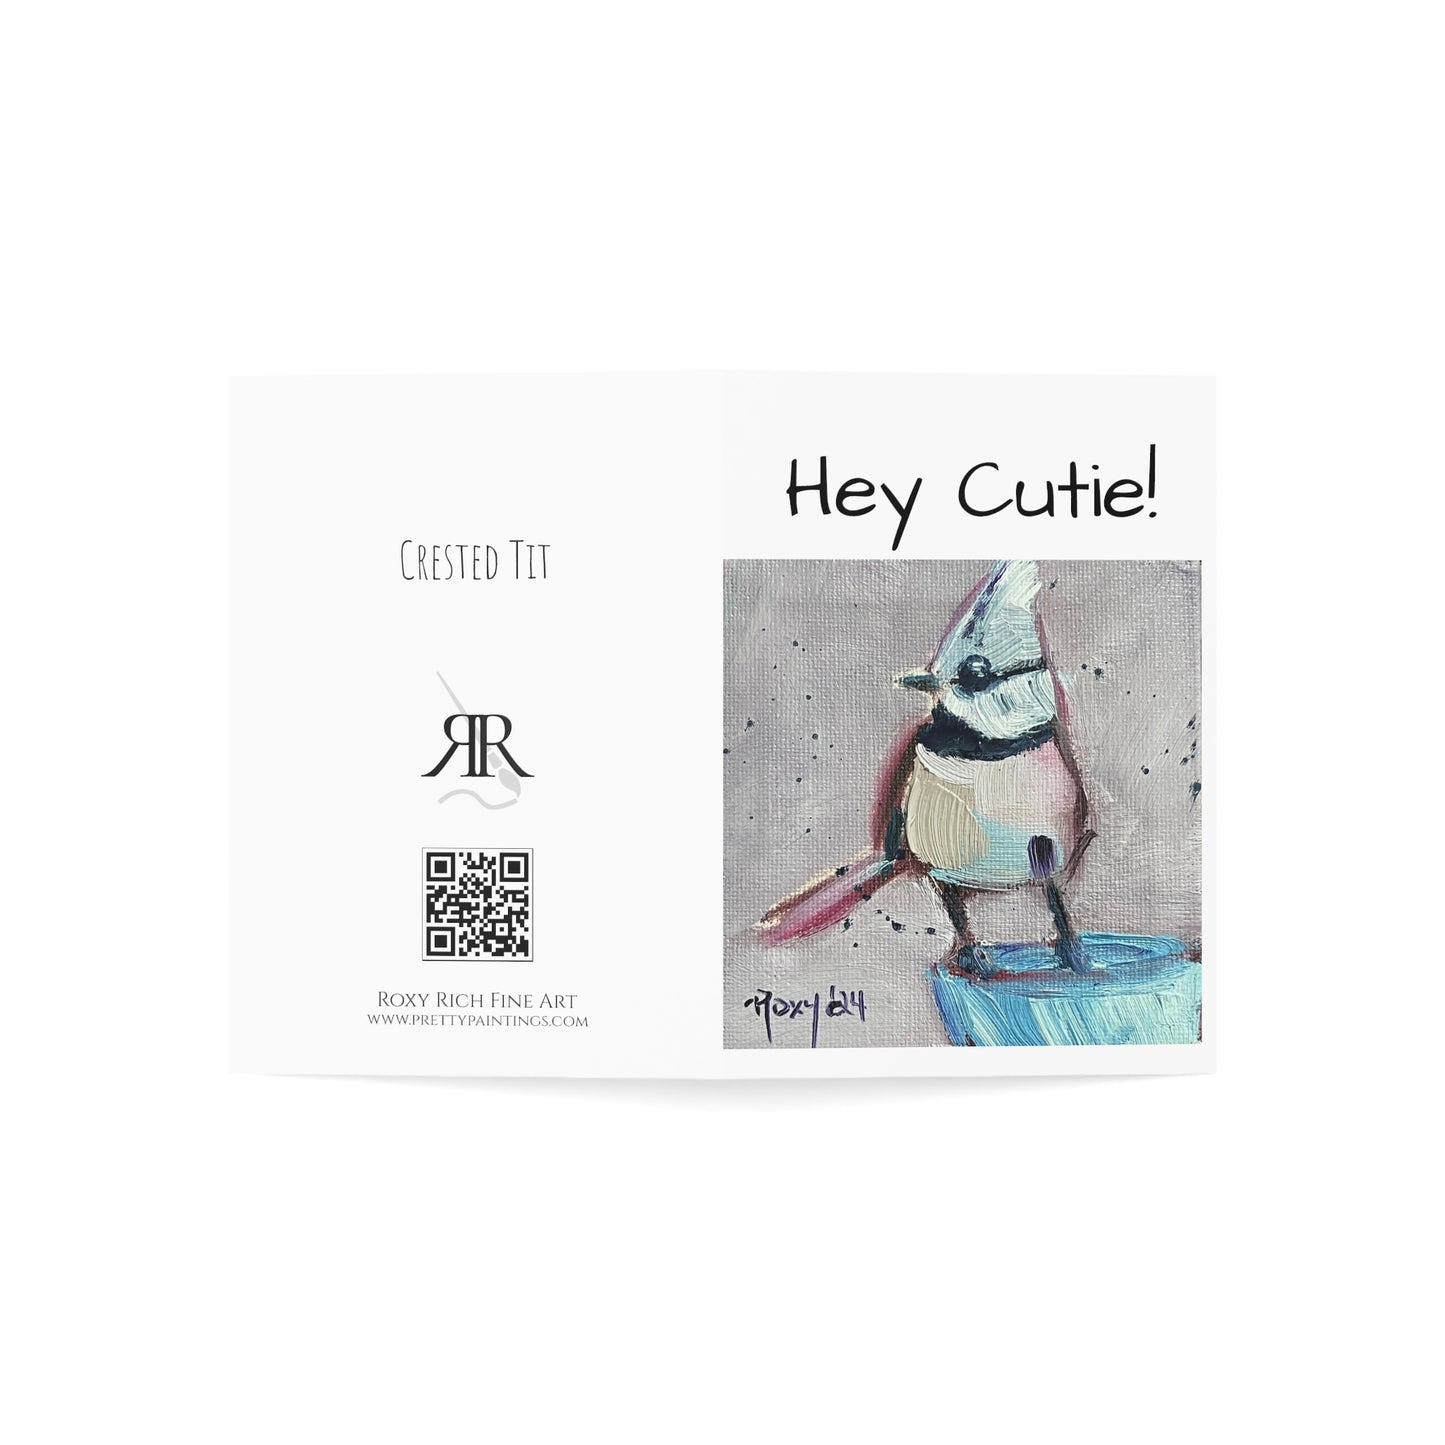 Adorable Crested Tit "Hey Cutie!" -Blank Inside Folded Greeting Cards